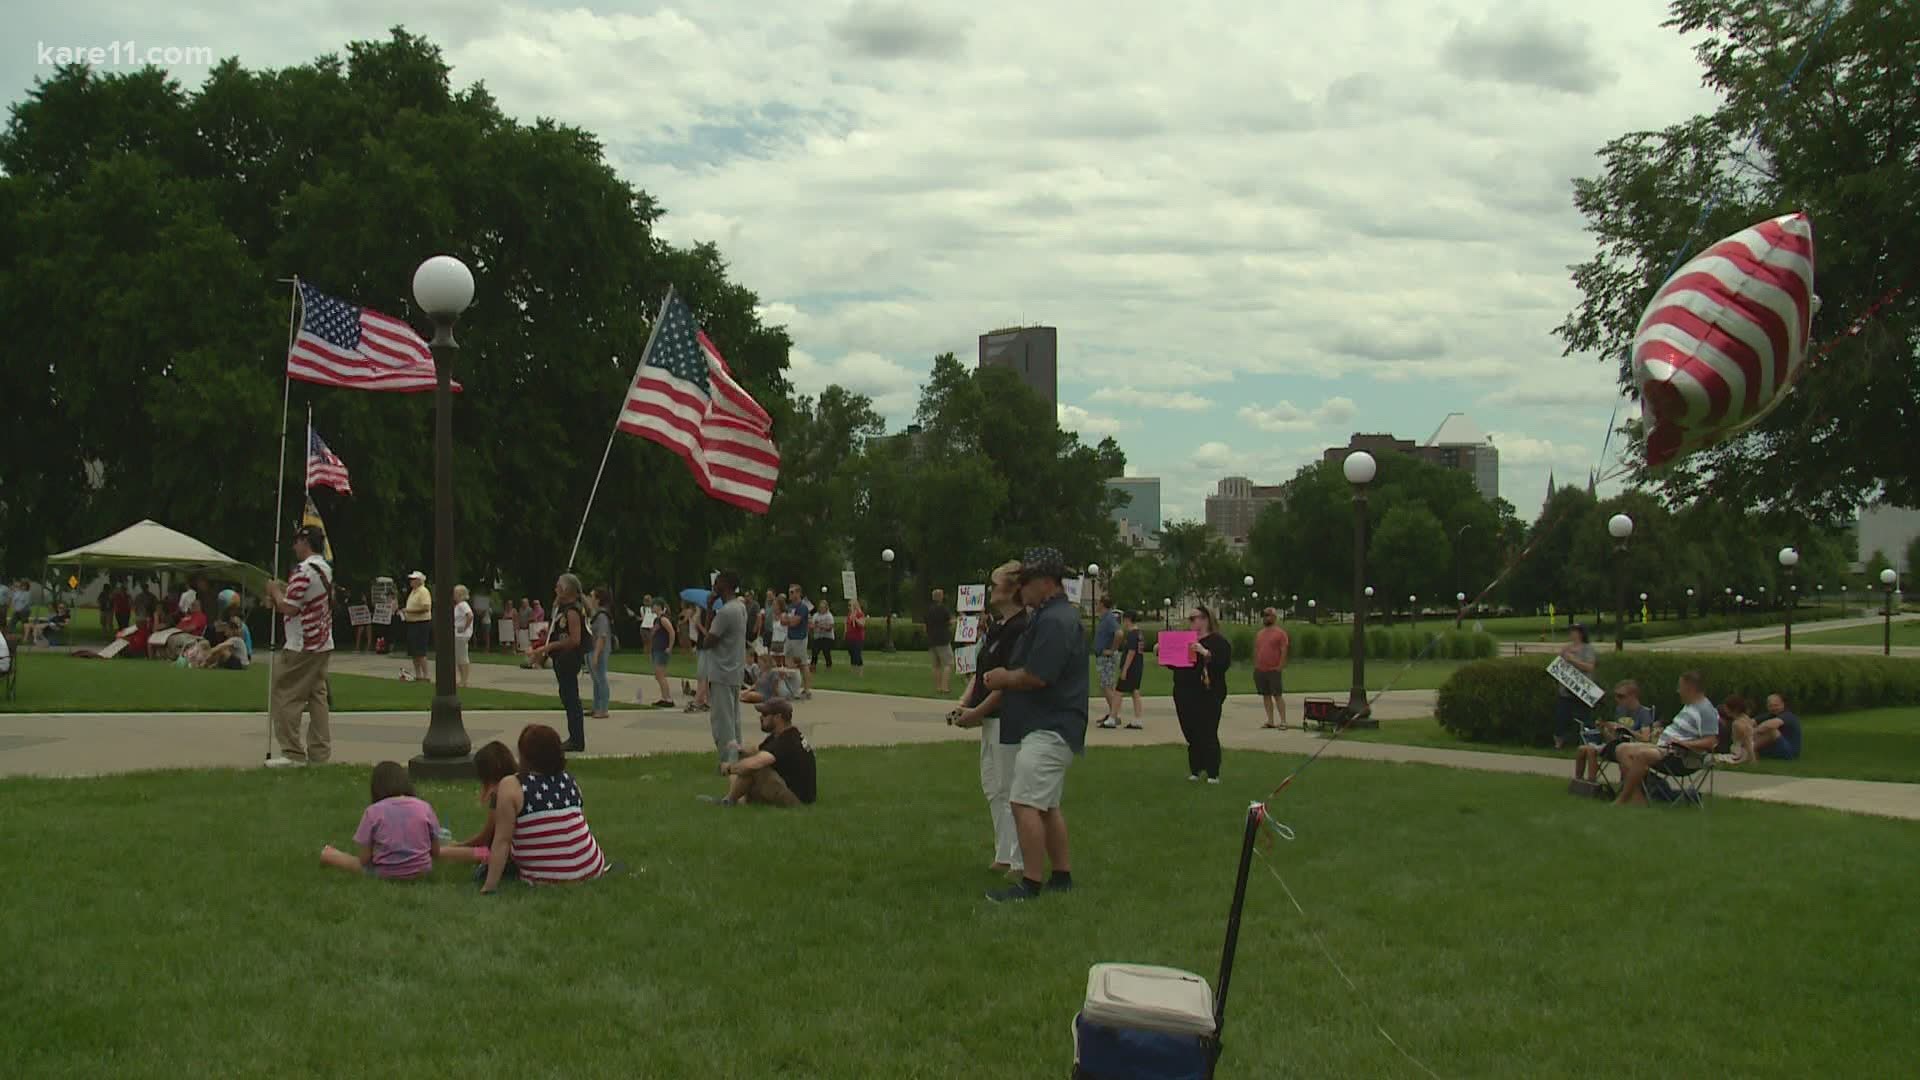 The group "Reopen Minnesota Schools" held a rally at the State Capitol Saturday afternoon.